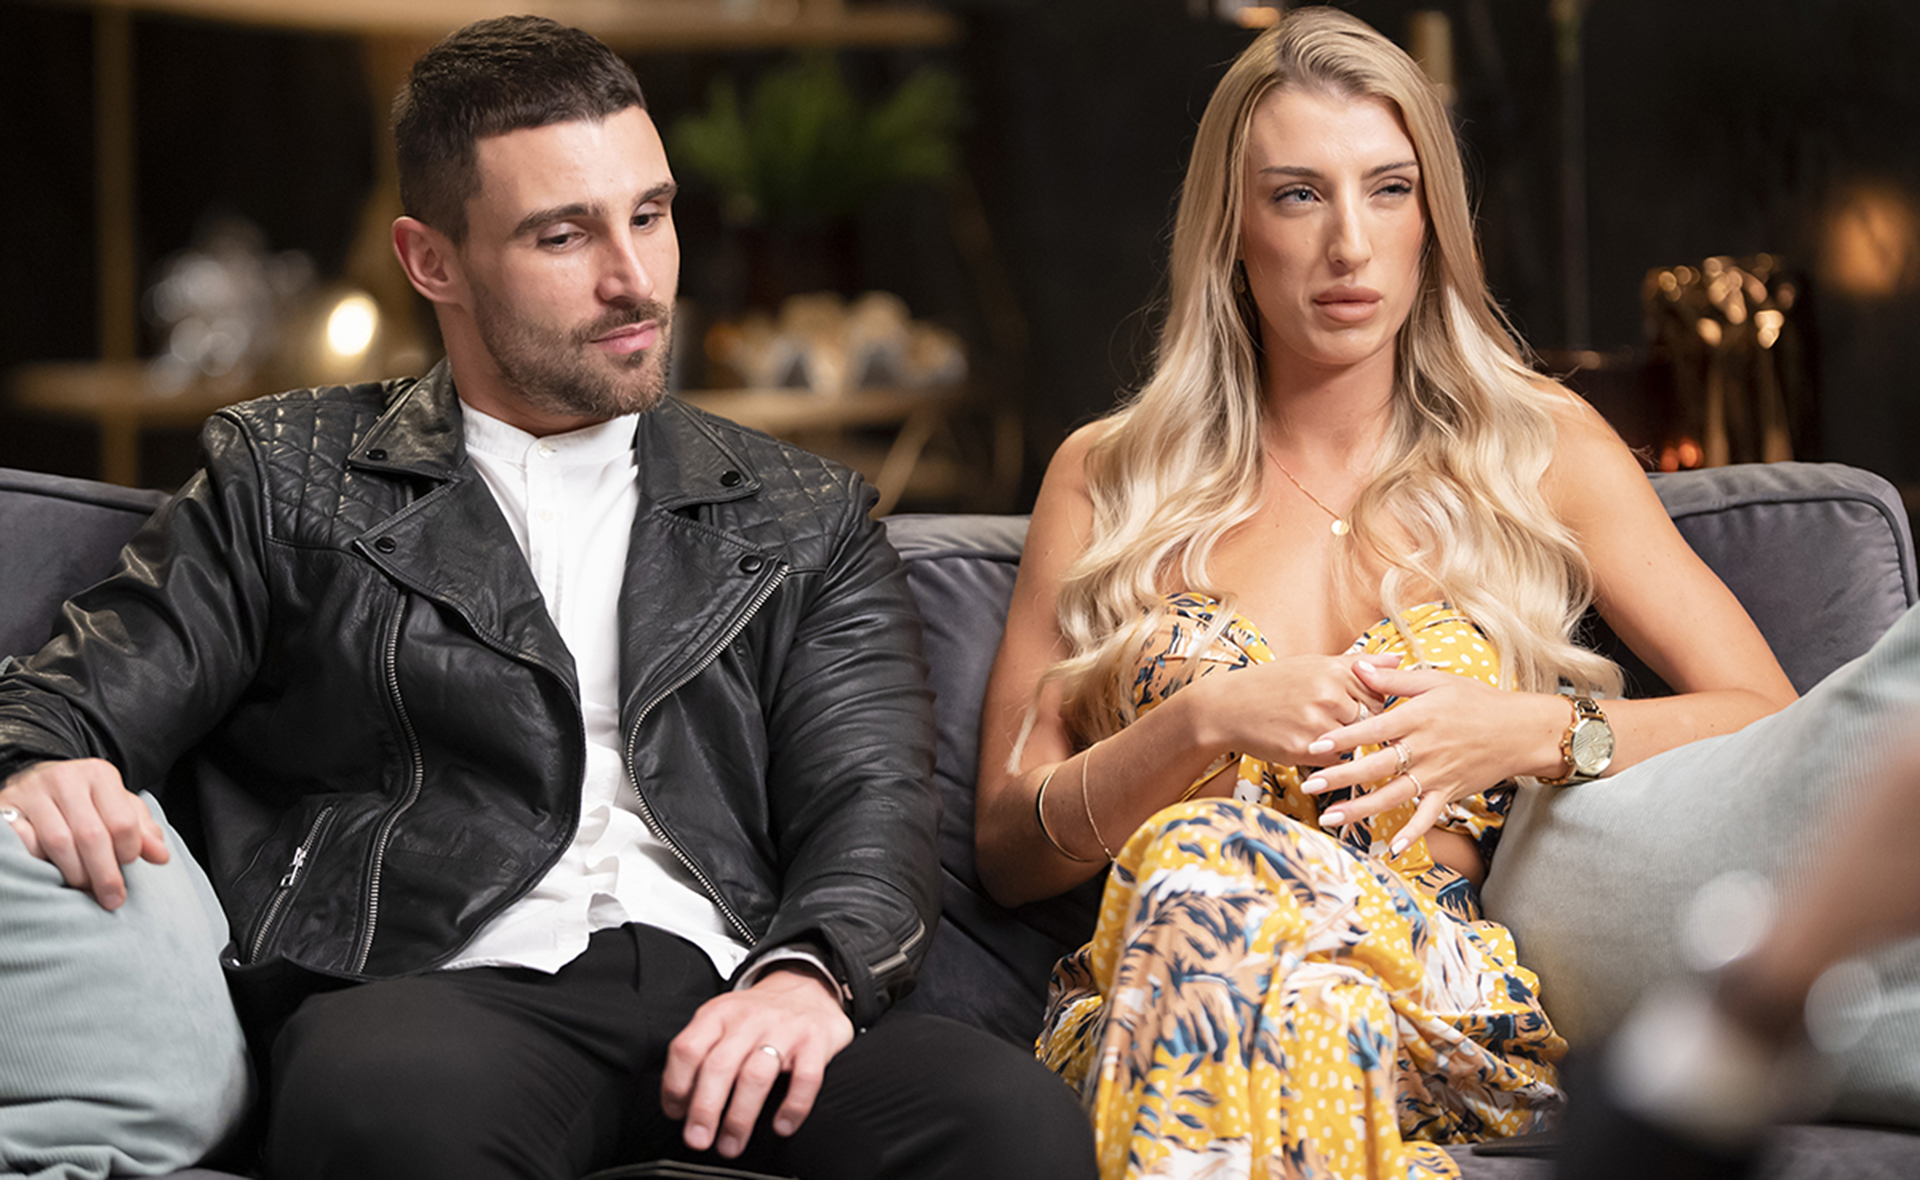 MAFS EXCLUSIVE: Brent Vitiello reveals what he really thinks of controversial groom Andrew Davis and sets the record straight on THAT premiere party video